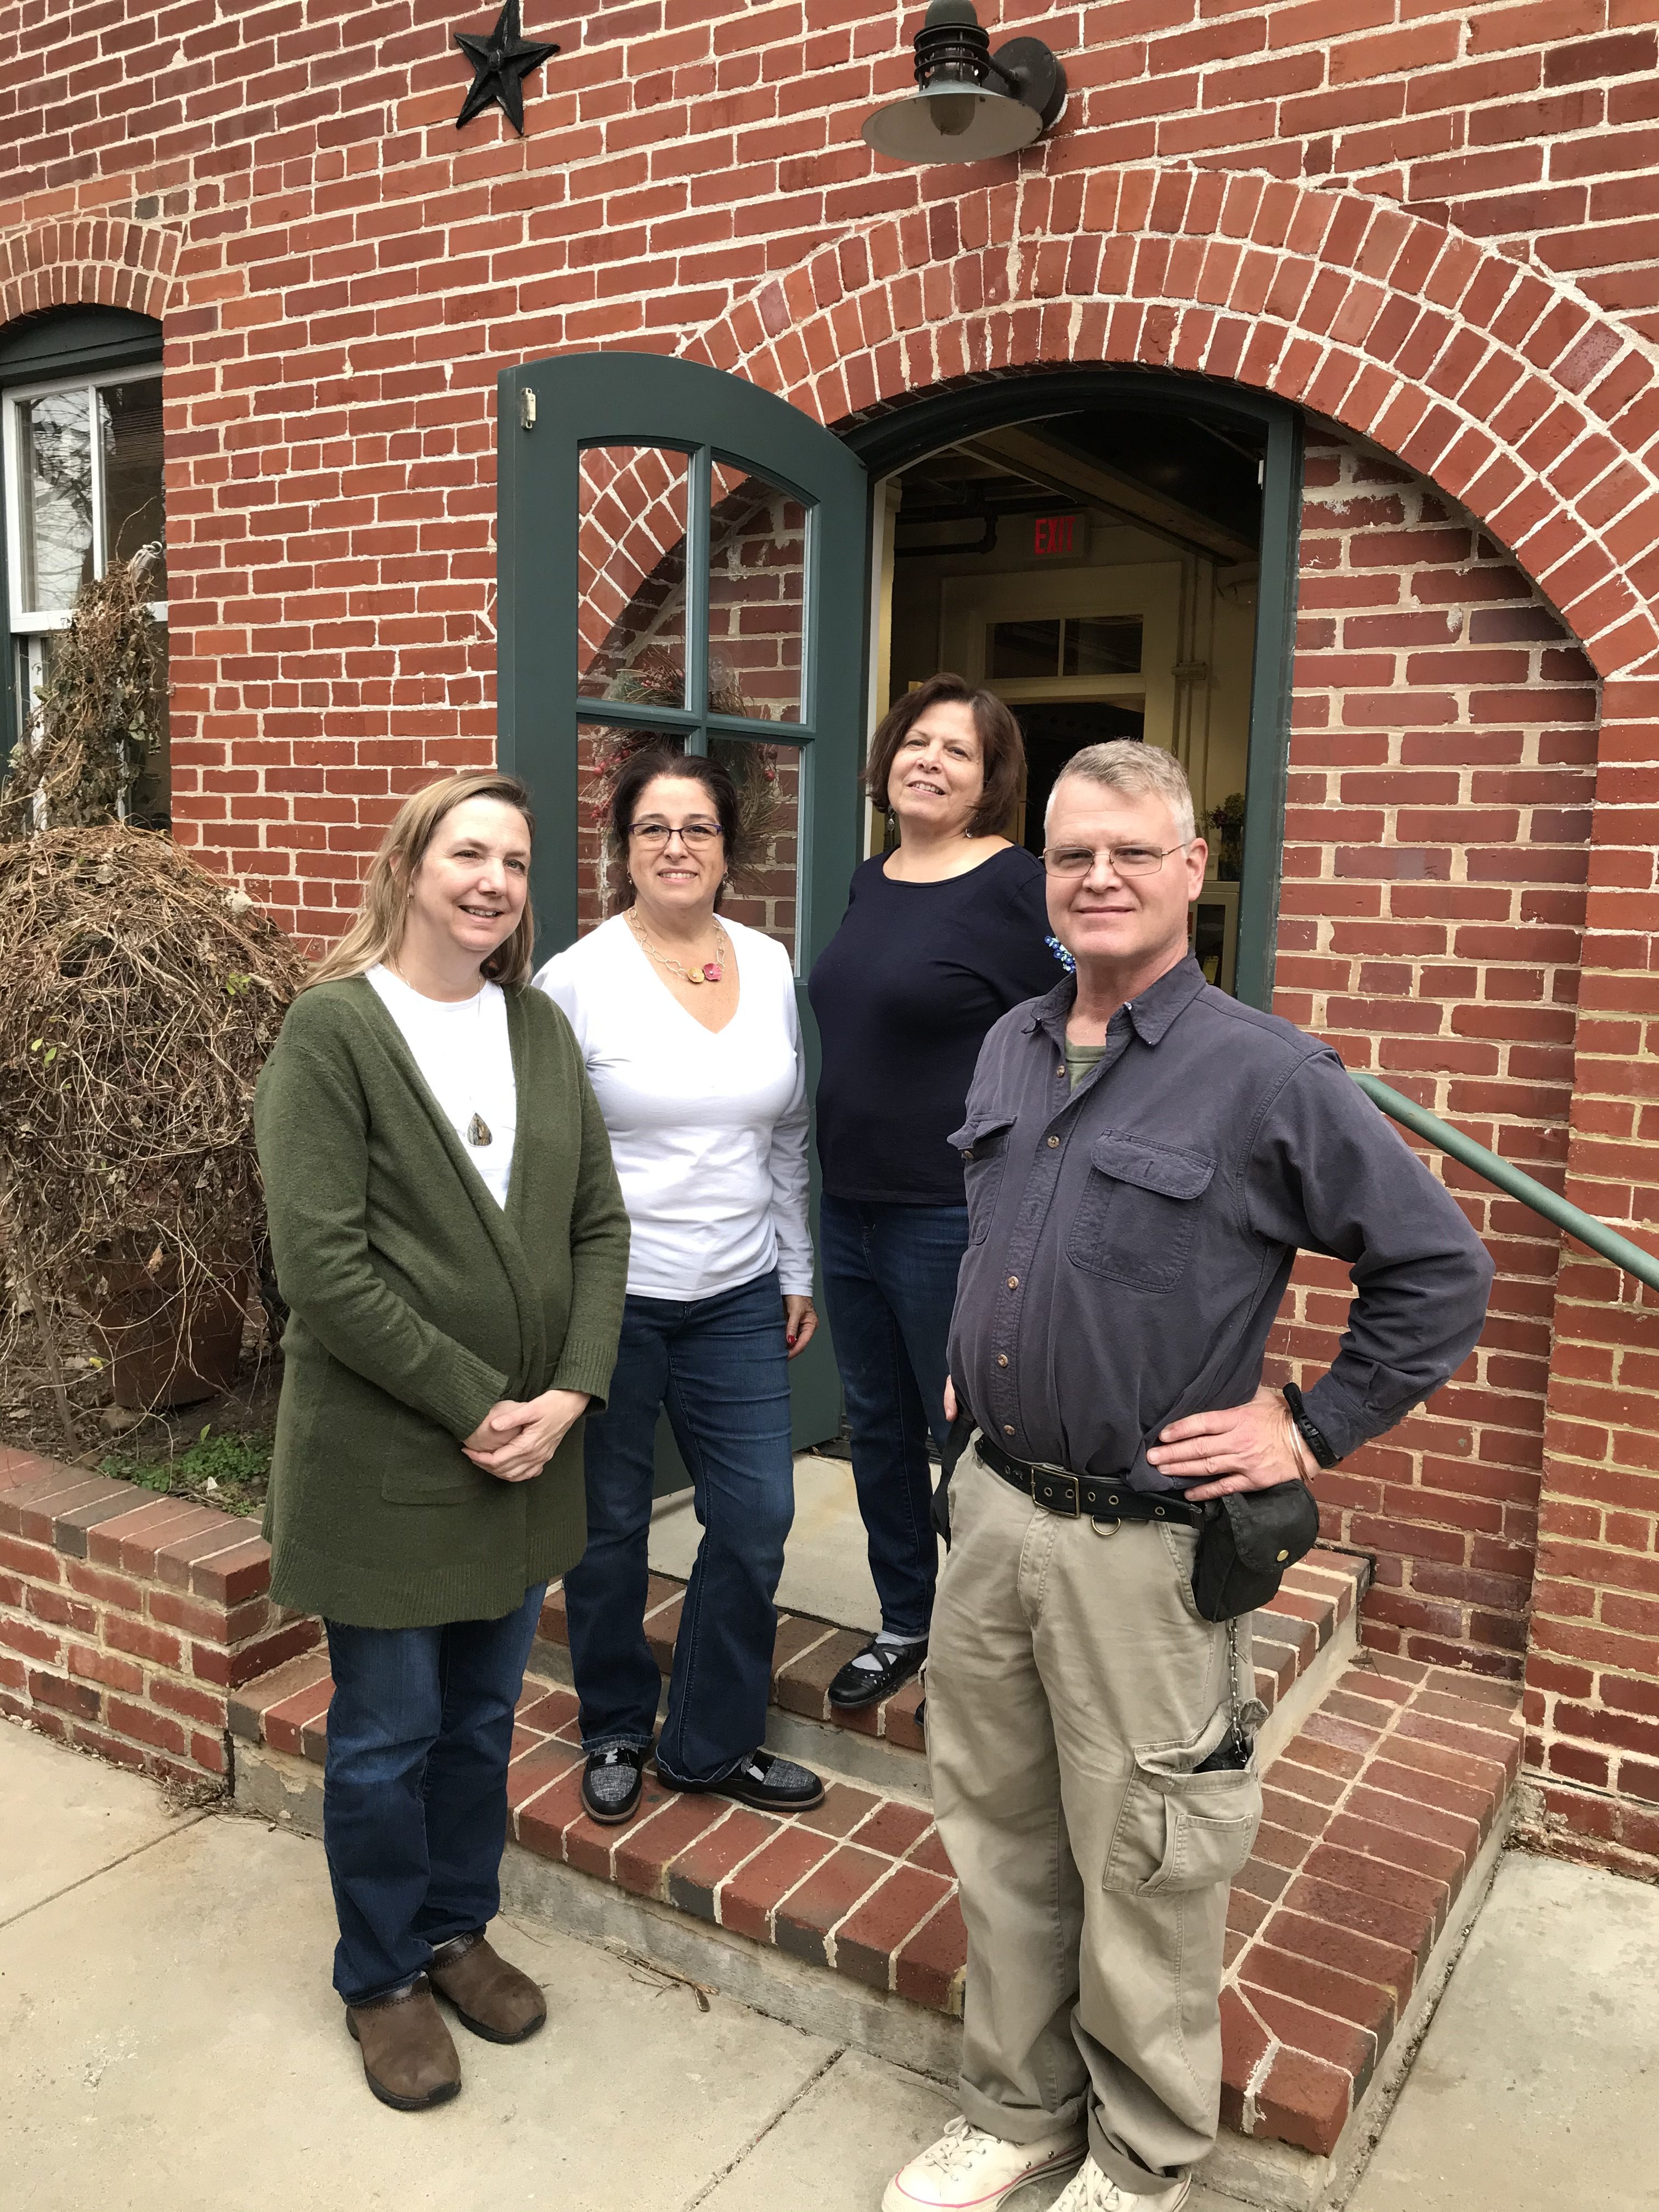 Portrait of the artists: from left, Jarree Donnelly, Maritza Suárez-Valenti, Jeanne Sullivan and Jack Donnelly pose in front of the Arts Barn.